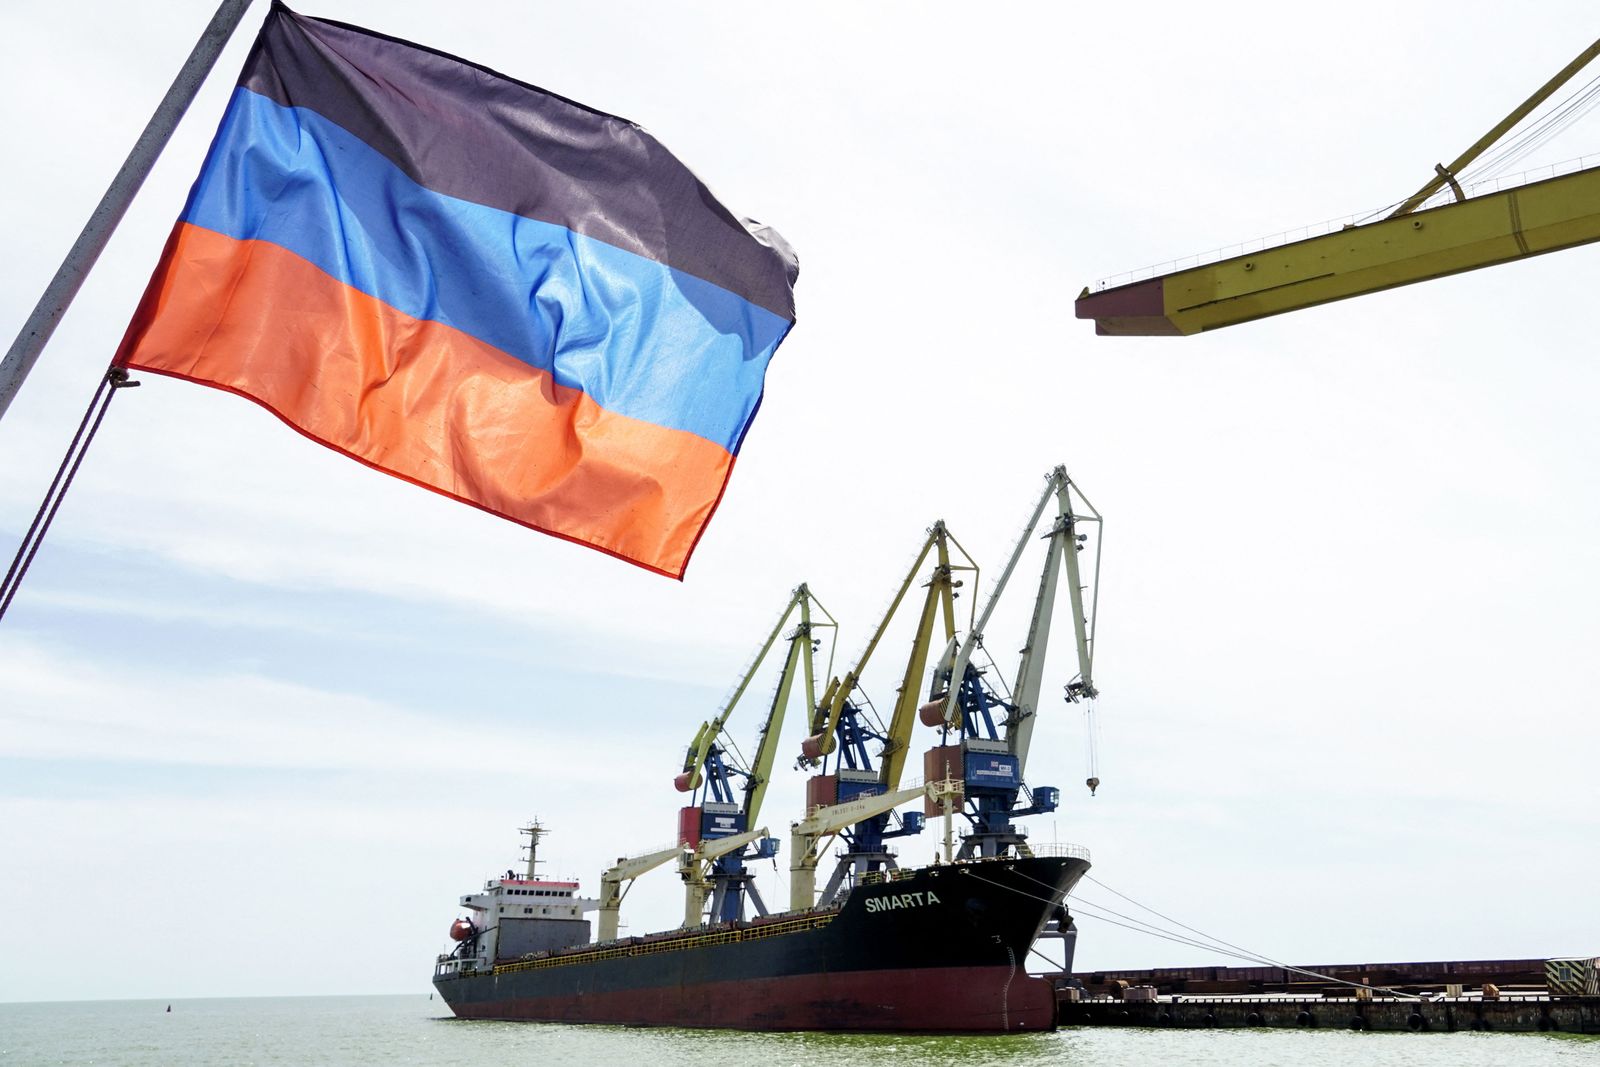 A photograph shows a Donetsk People Republic's flag in front of a ship in the harbour of  Mariupol on June 3, 2022, on the 100th day of the Russian invasion of Ukraine. - Ukrainian President Volodymyr Zelensky vowed victory on the 100th day of Russia's invasion on June 3, 2022, even as Russian troops pounded the eastern Donbas region. (Photo by STRINGER / AFP) - AFP